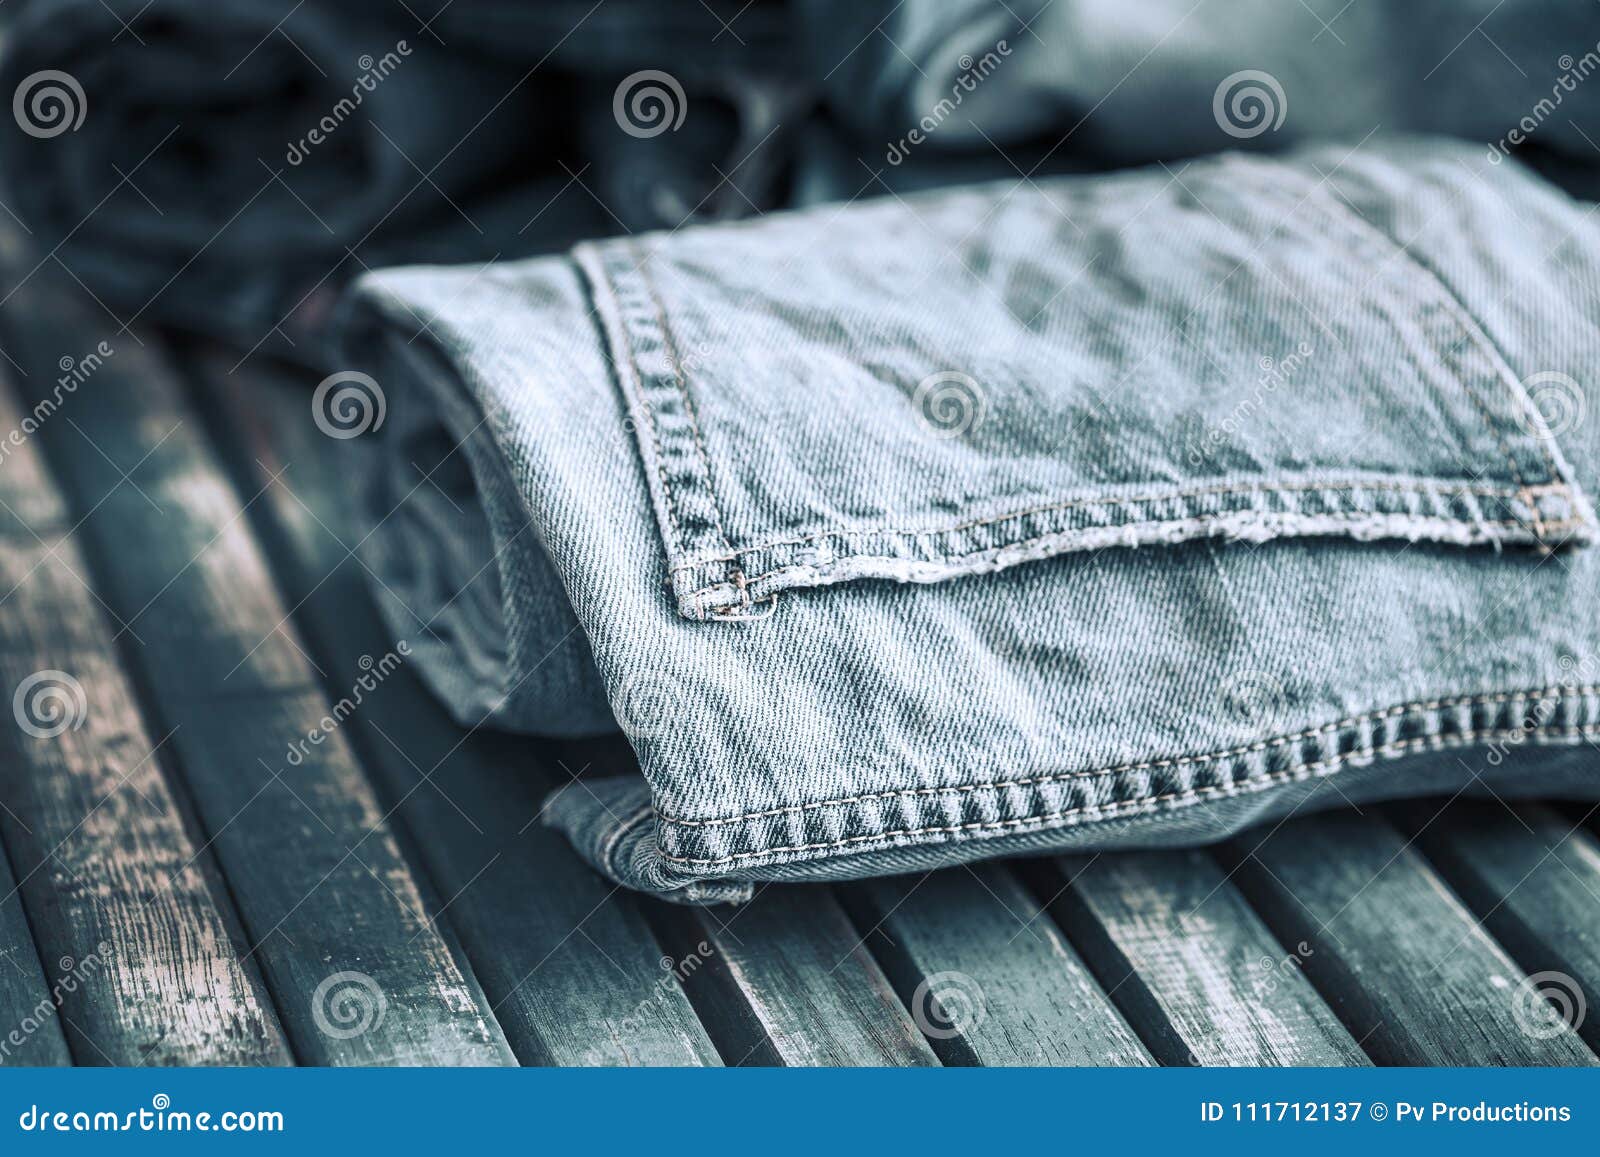 Jeans on a Wooden Background Stock Image - Image of blank, cotton ...